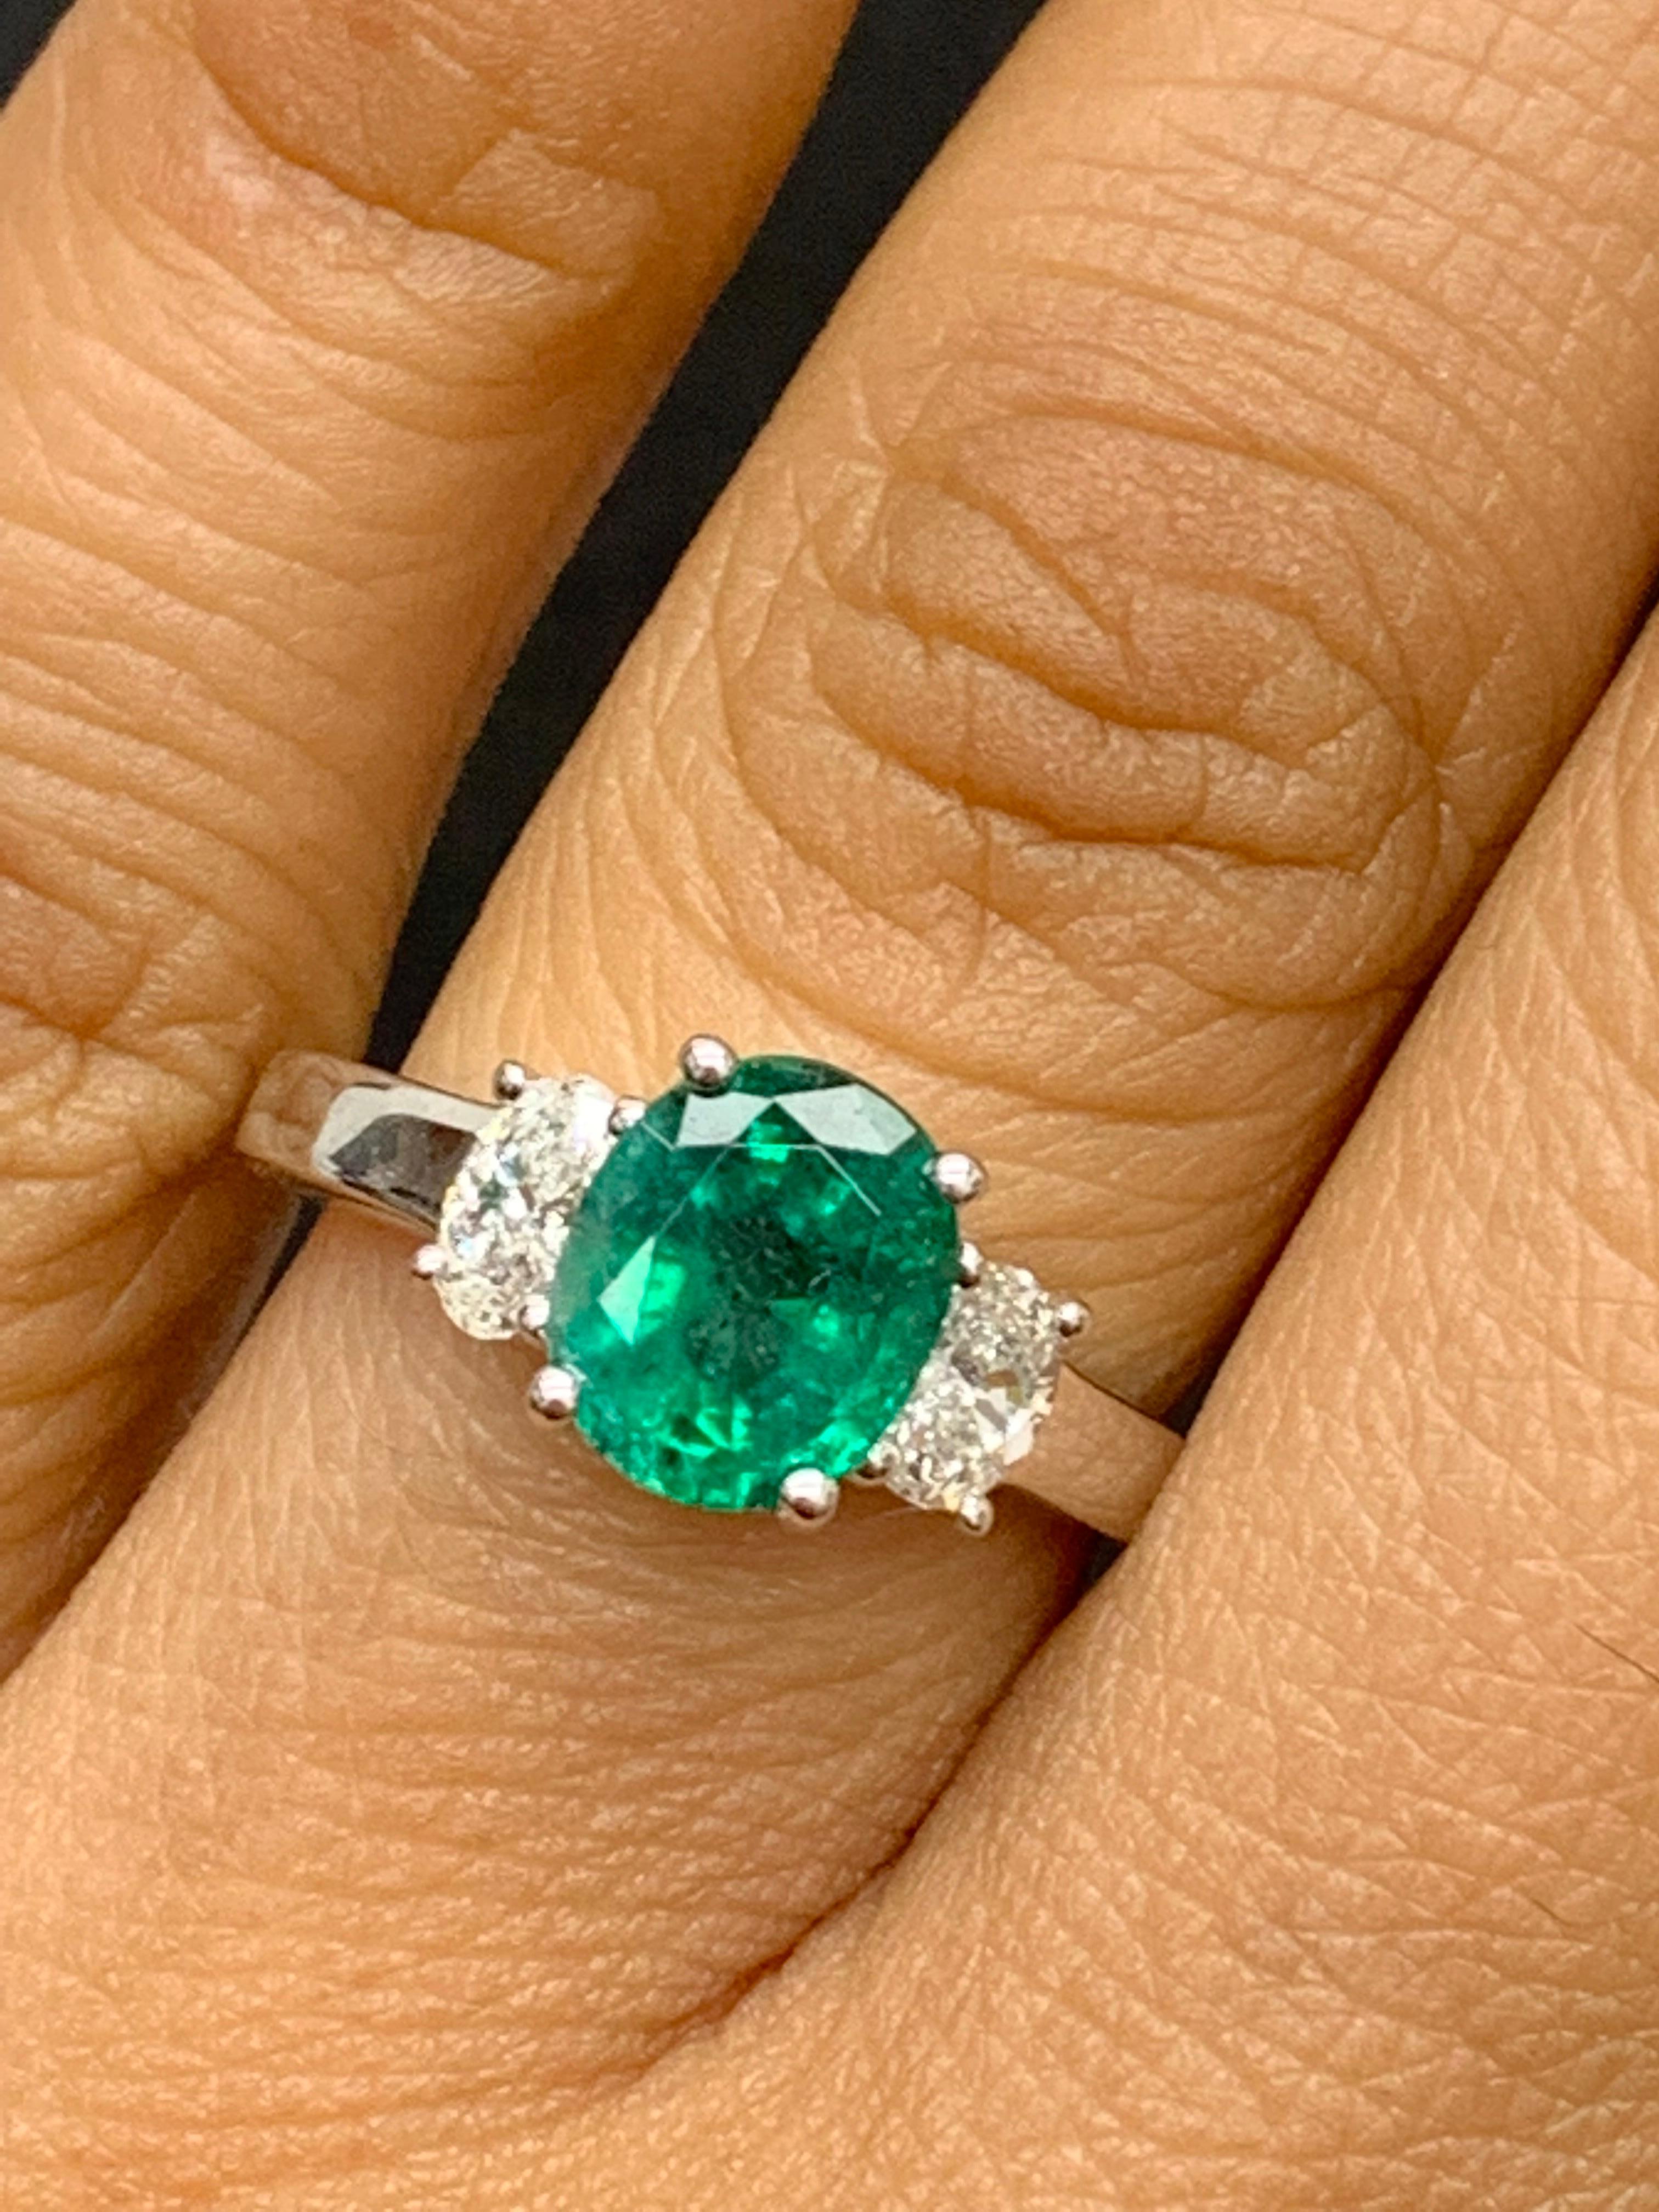 Showcases an Oval cut, Vibrant color green Emerald weighing 1.97 carats, flanked by two brilliant oval cut diamonds weighing 0.48 carats. Elegantly set in 18k White Gold.